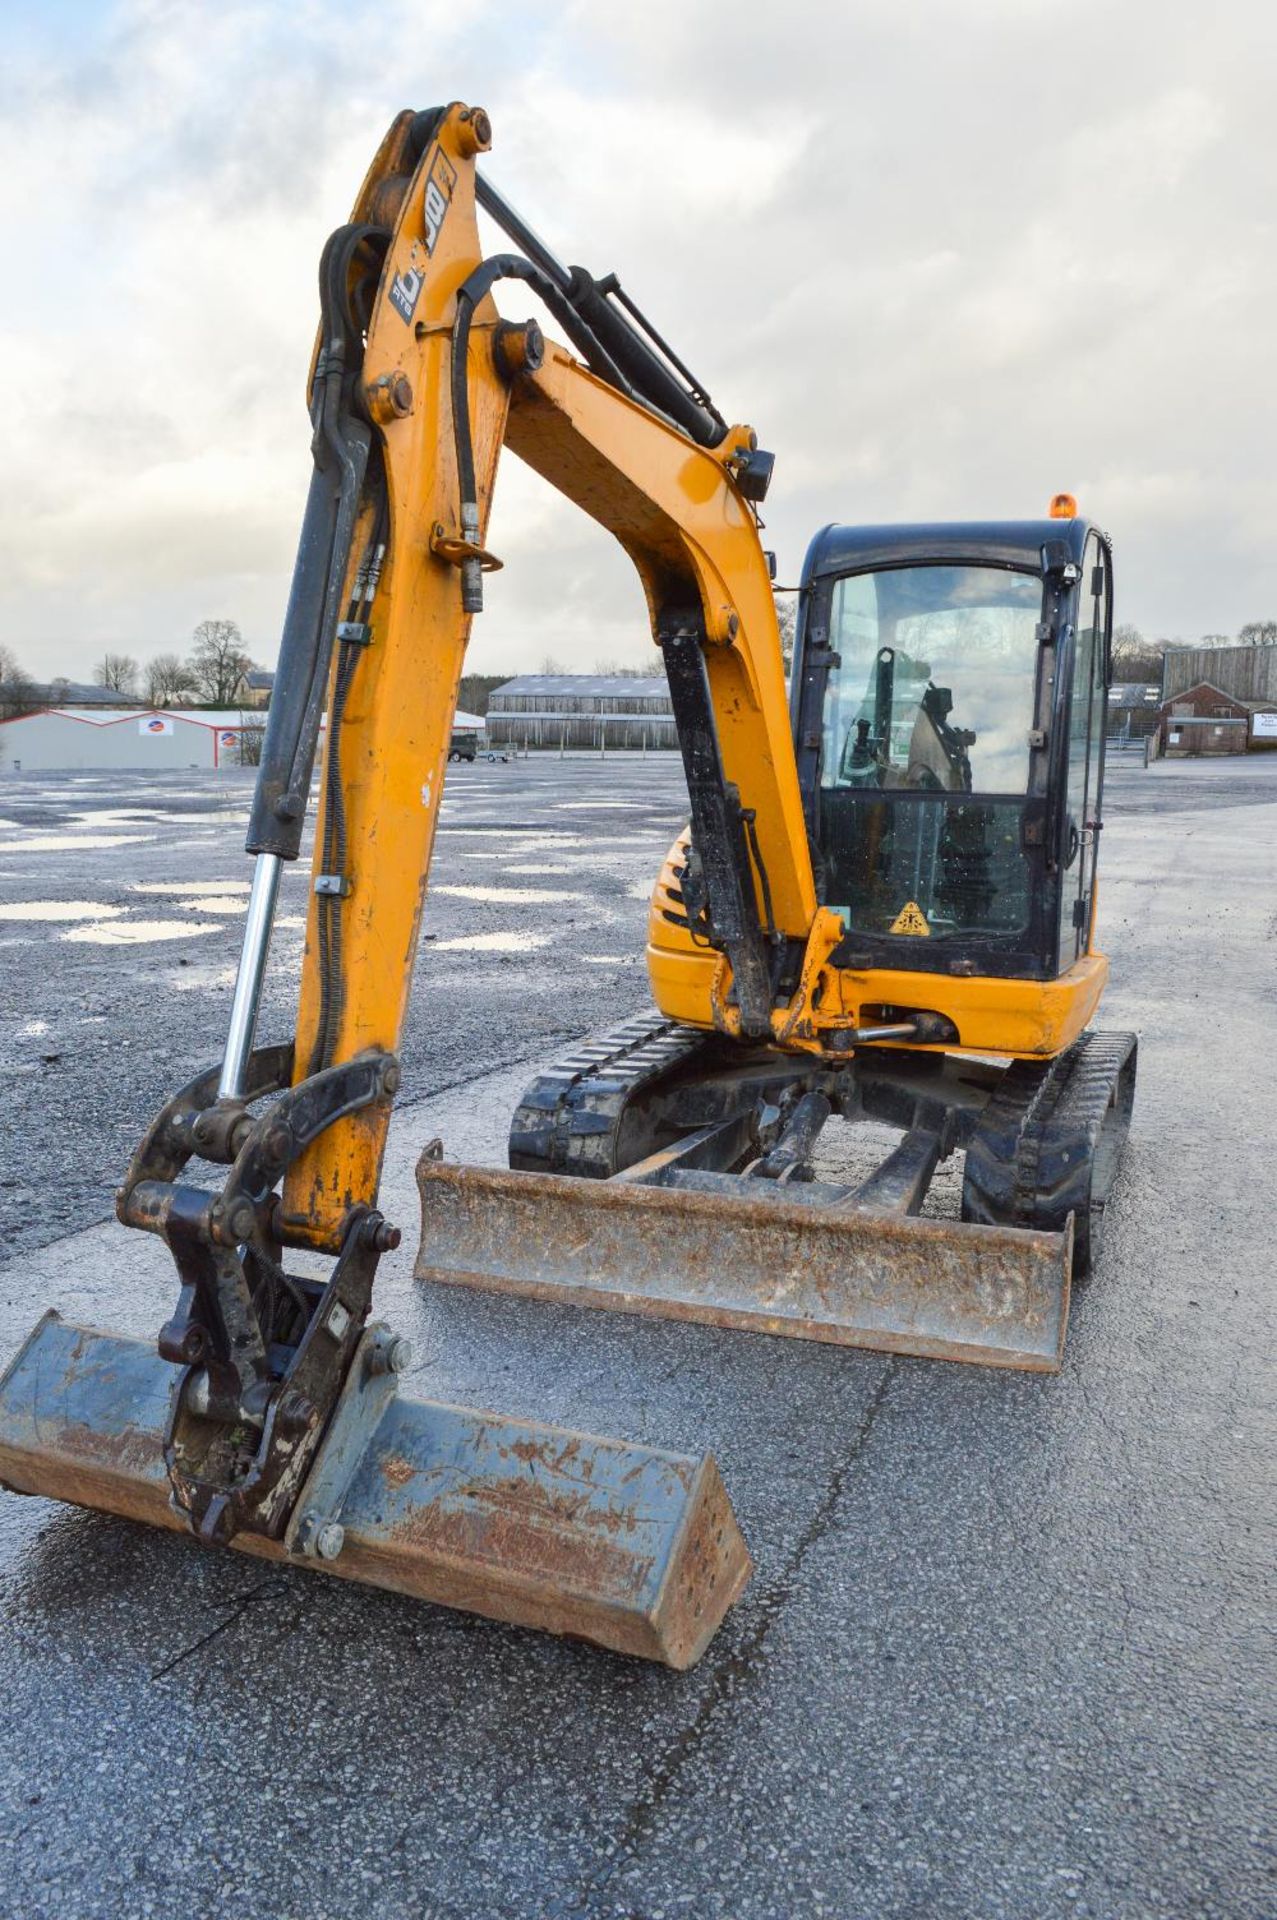 JCB 8050 RTS 5 tonne reduced tail swing rubber tracked mini excavator
Year: 2011
S/N: 1741659 - Image 6 of 12